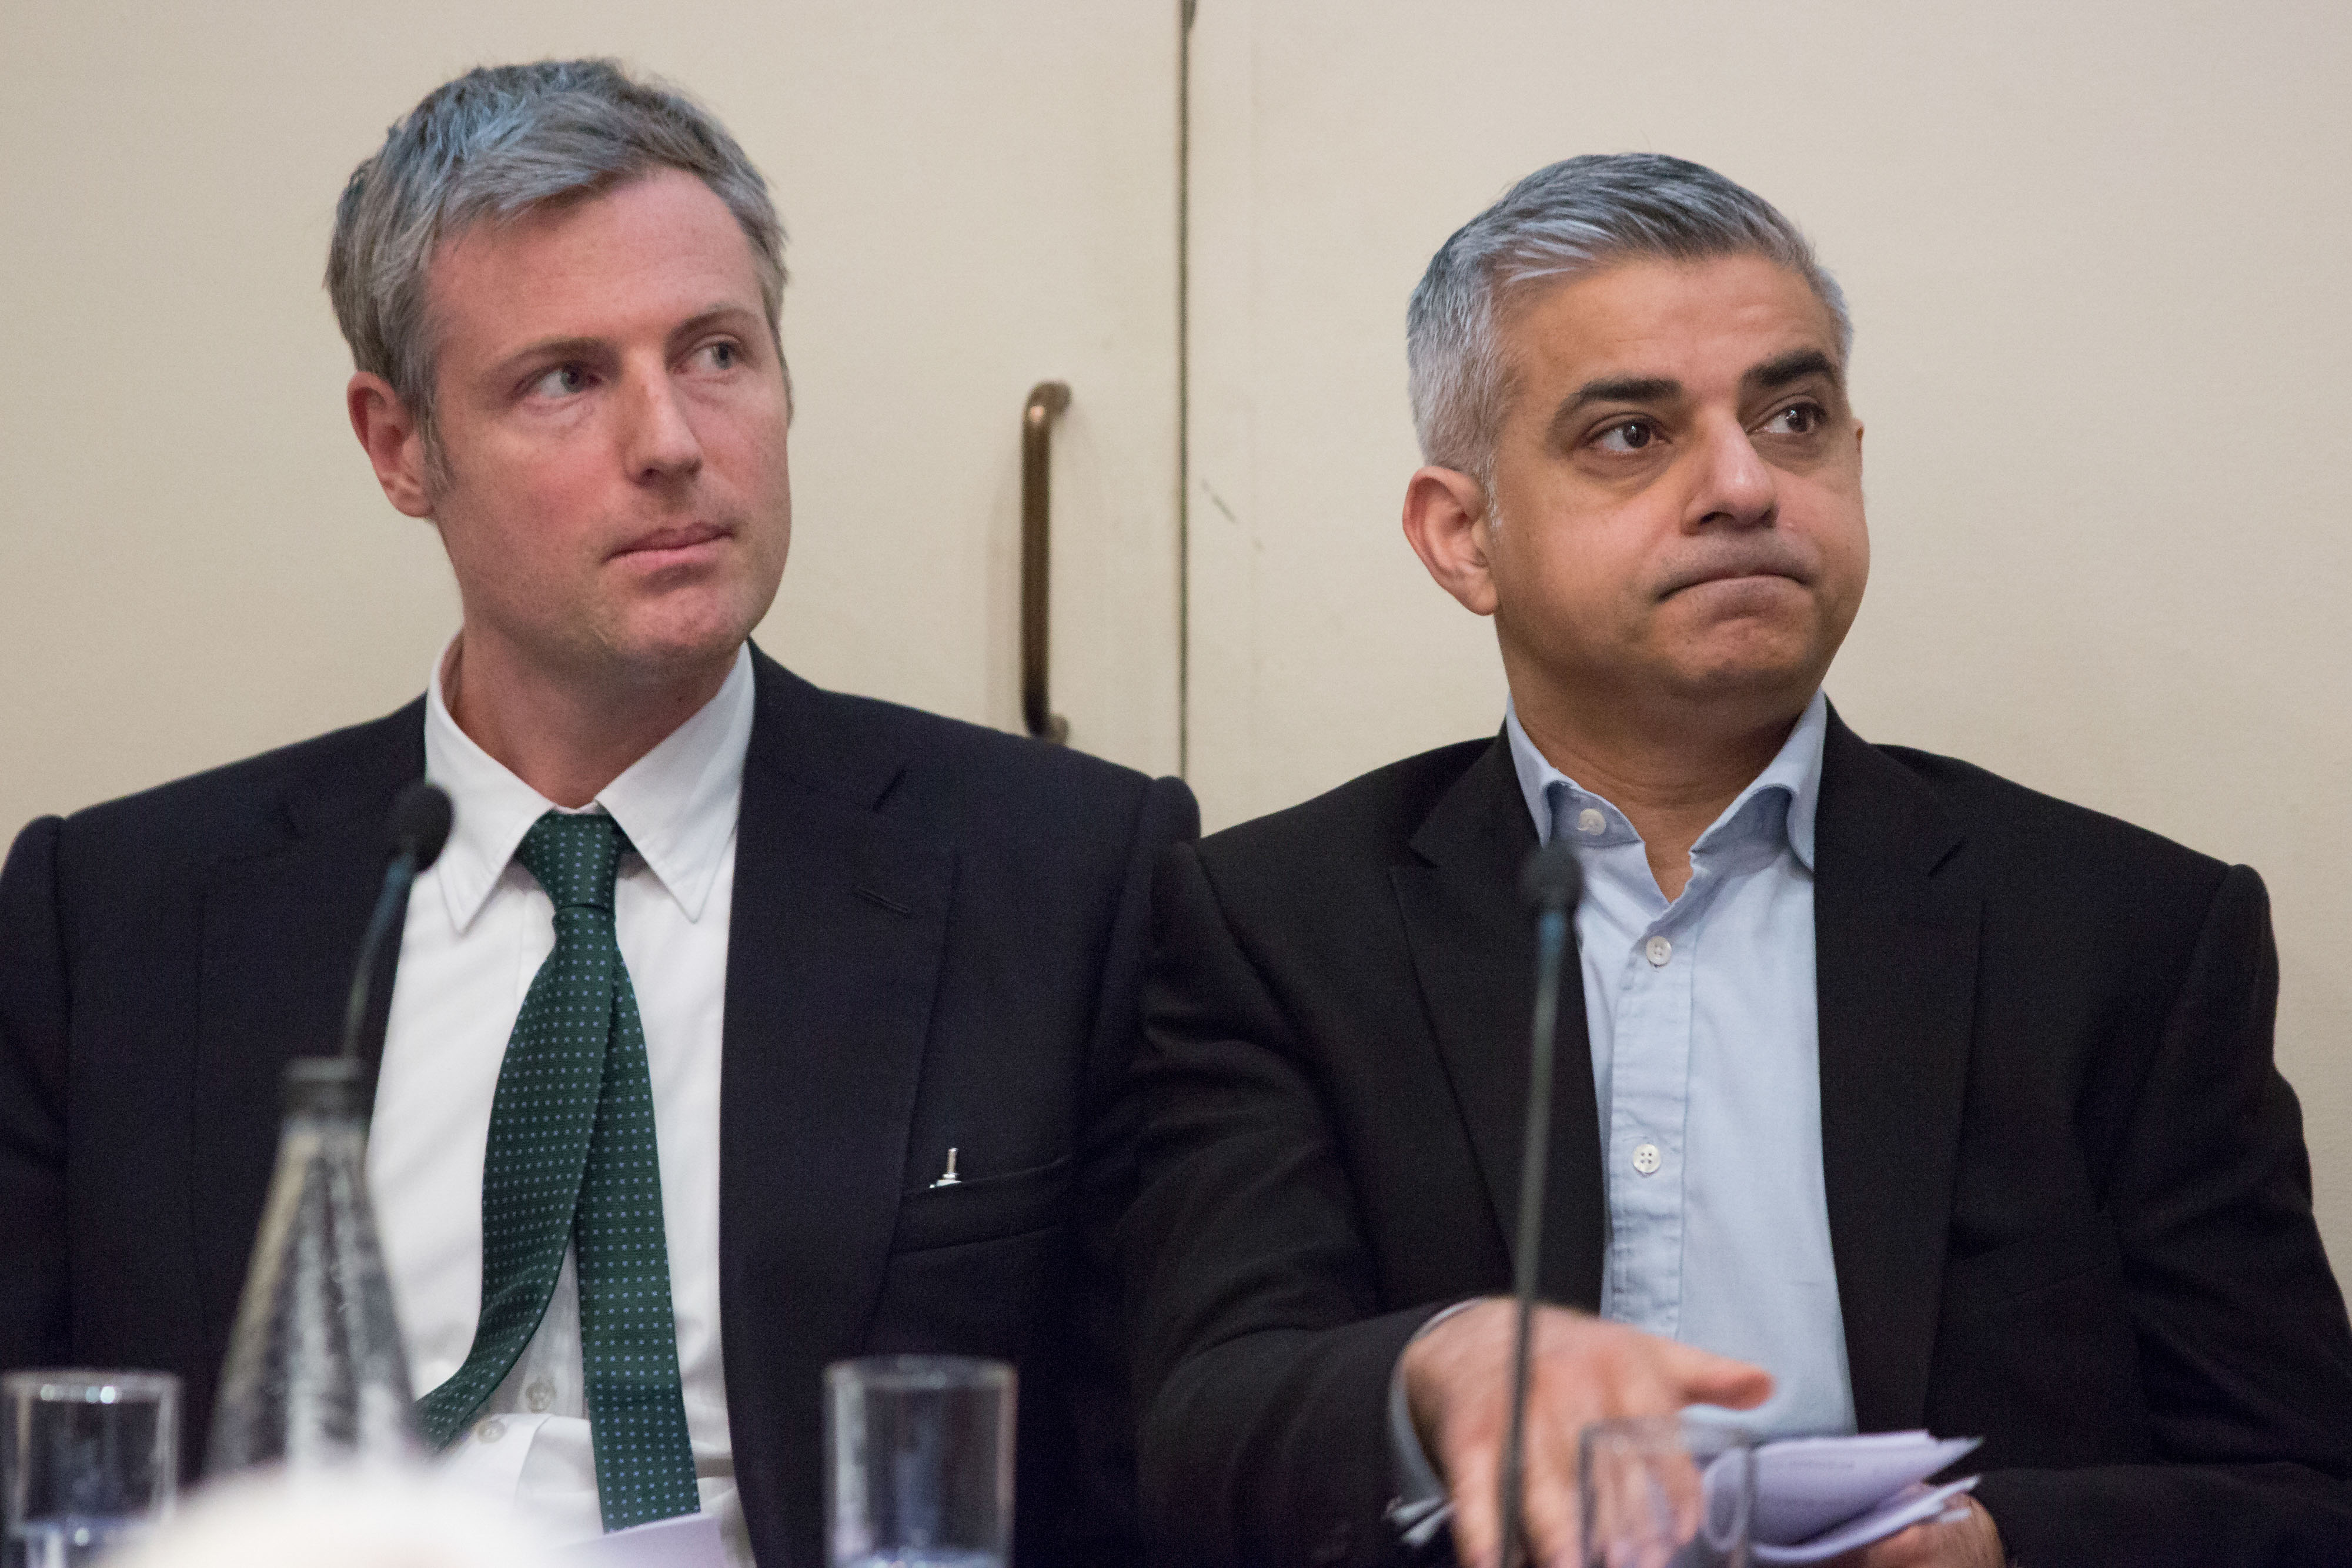 London Mayoral Candidates Attend The Launch Of London Housing Commission Report